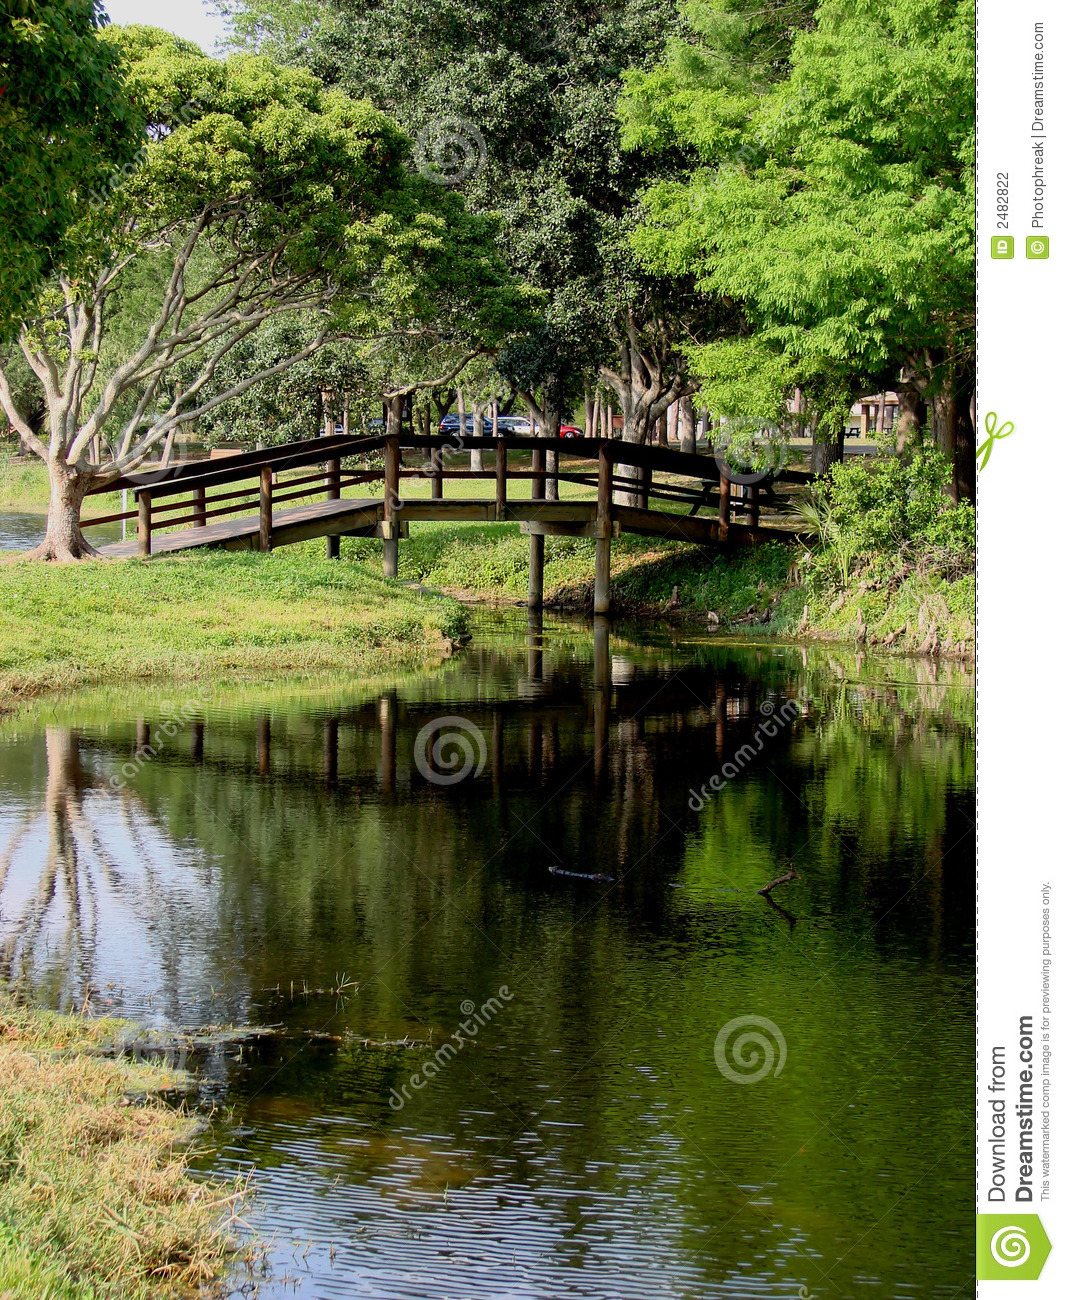 Wooden Bridge Crossing Over Pond Or Stream Trees And Grassy Shore